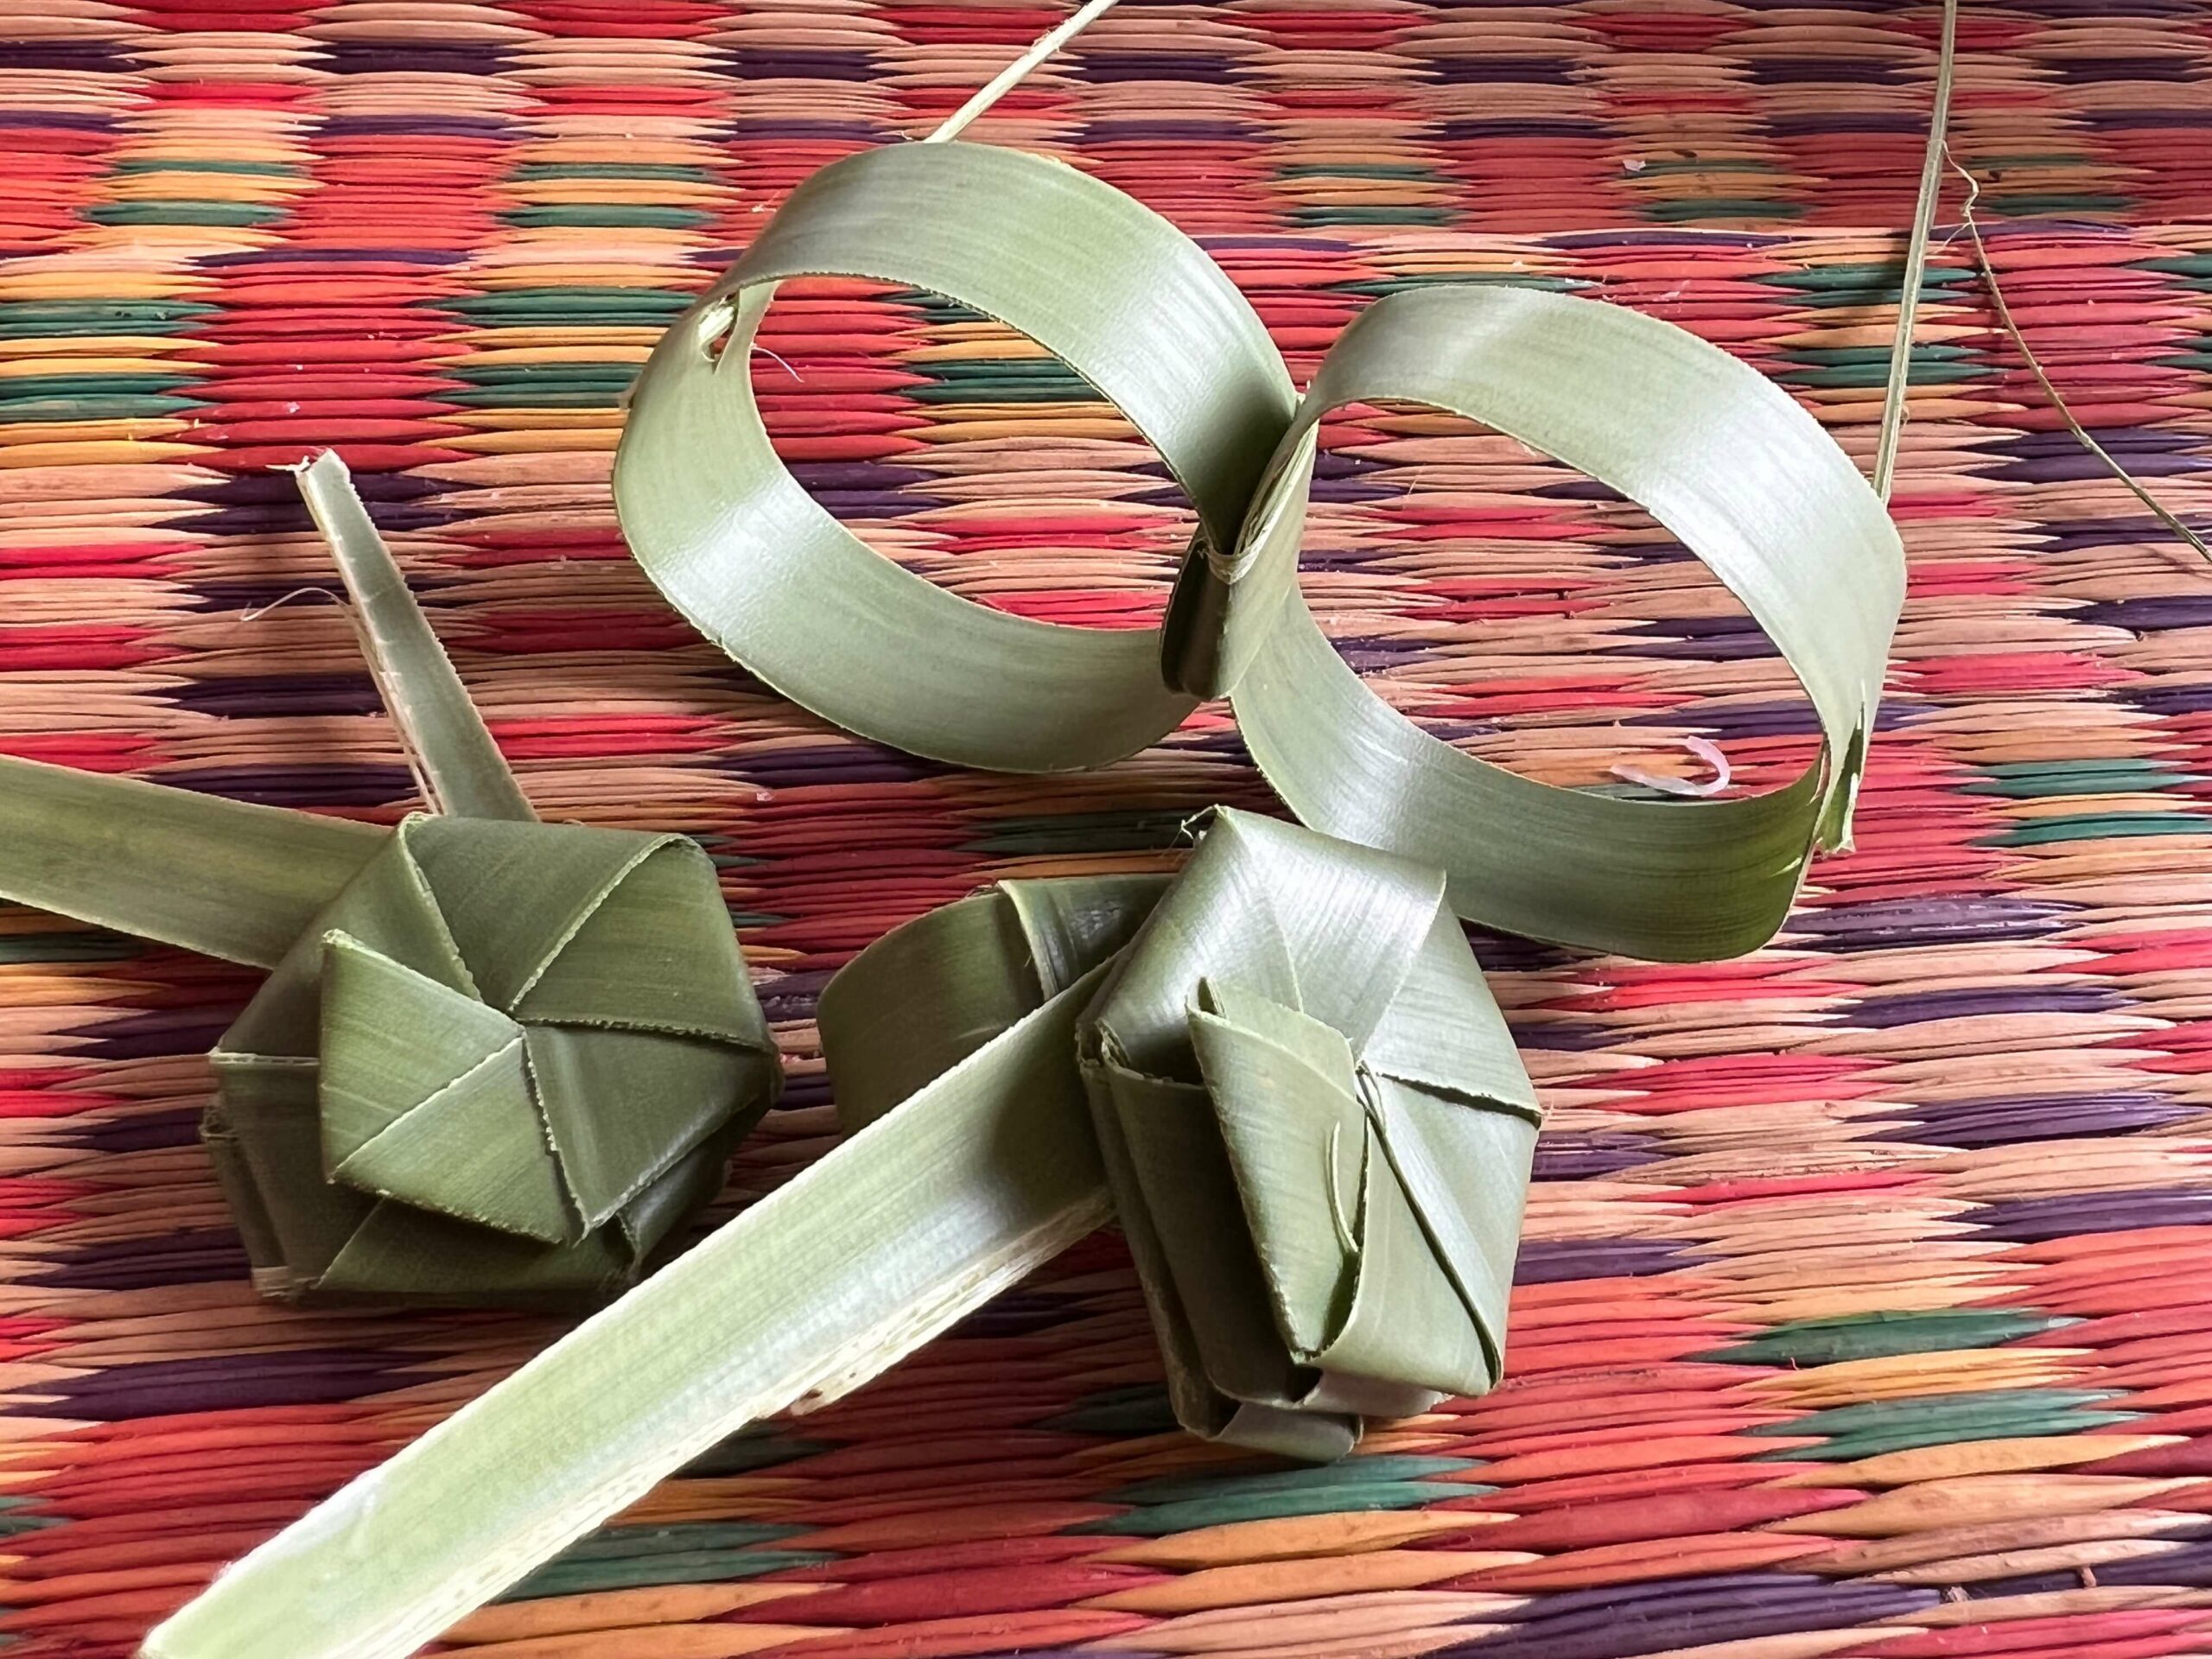 Make some souvenirs from palm leaves